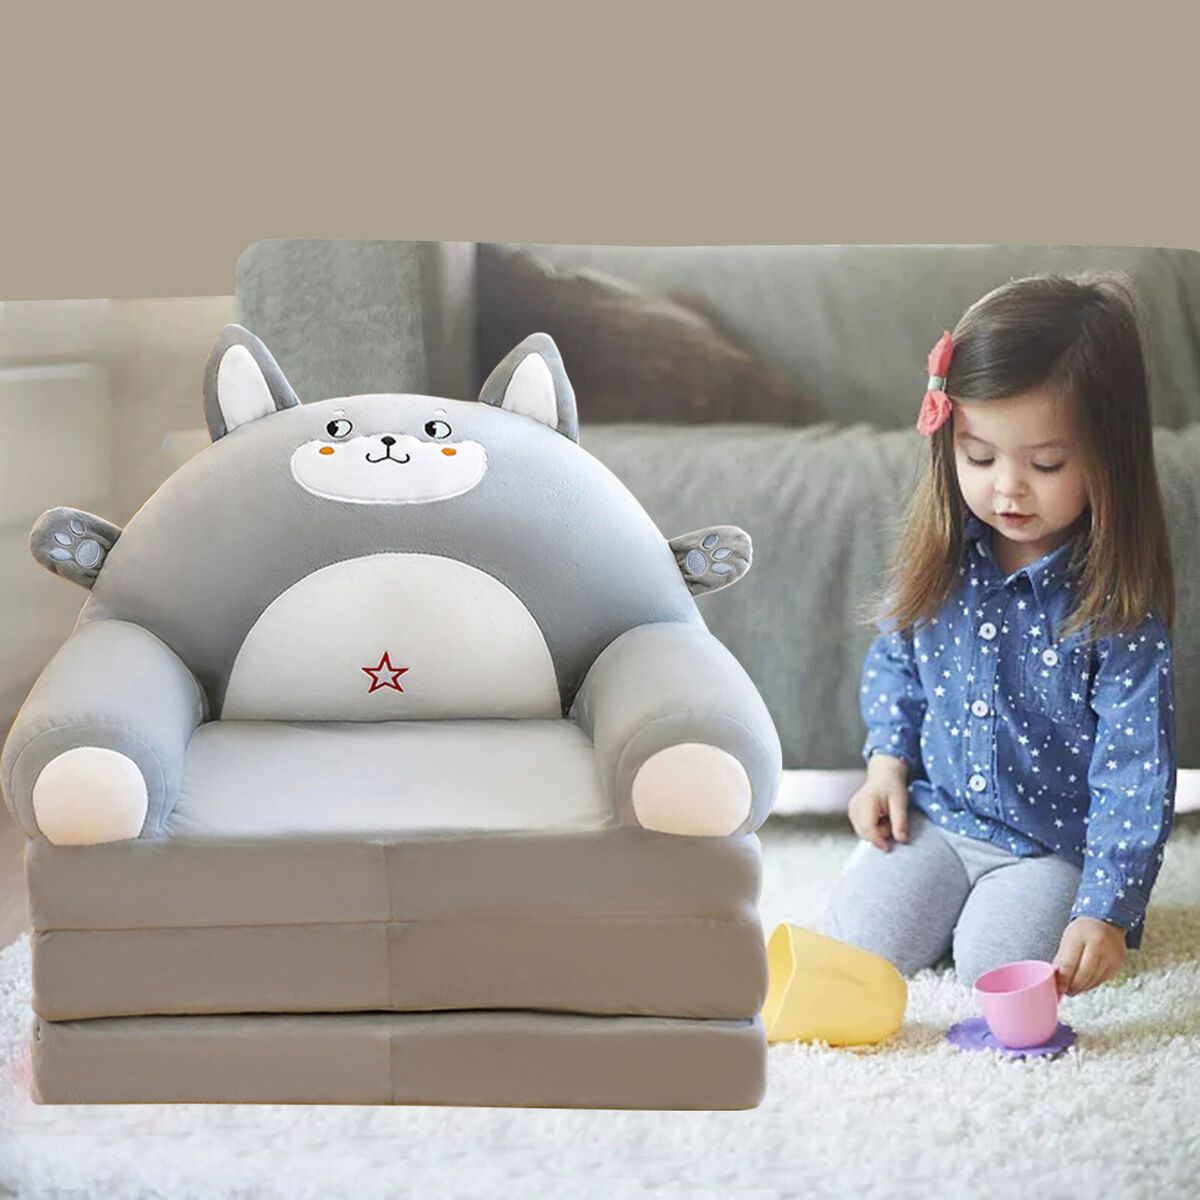 Plush Foldable Kids Sofa Backrest Armchair 2 In 1 Foldable Without Liner  Filler | Ebay Regarding 2 In 1 Foldable Sofas (View 7 of 15)